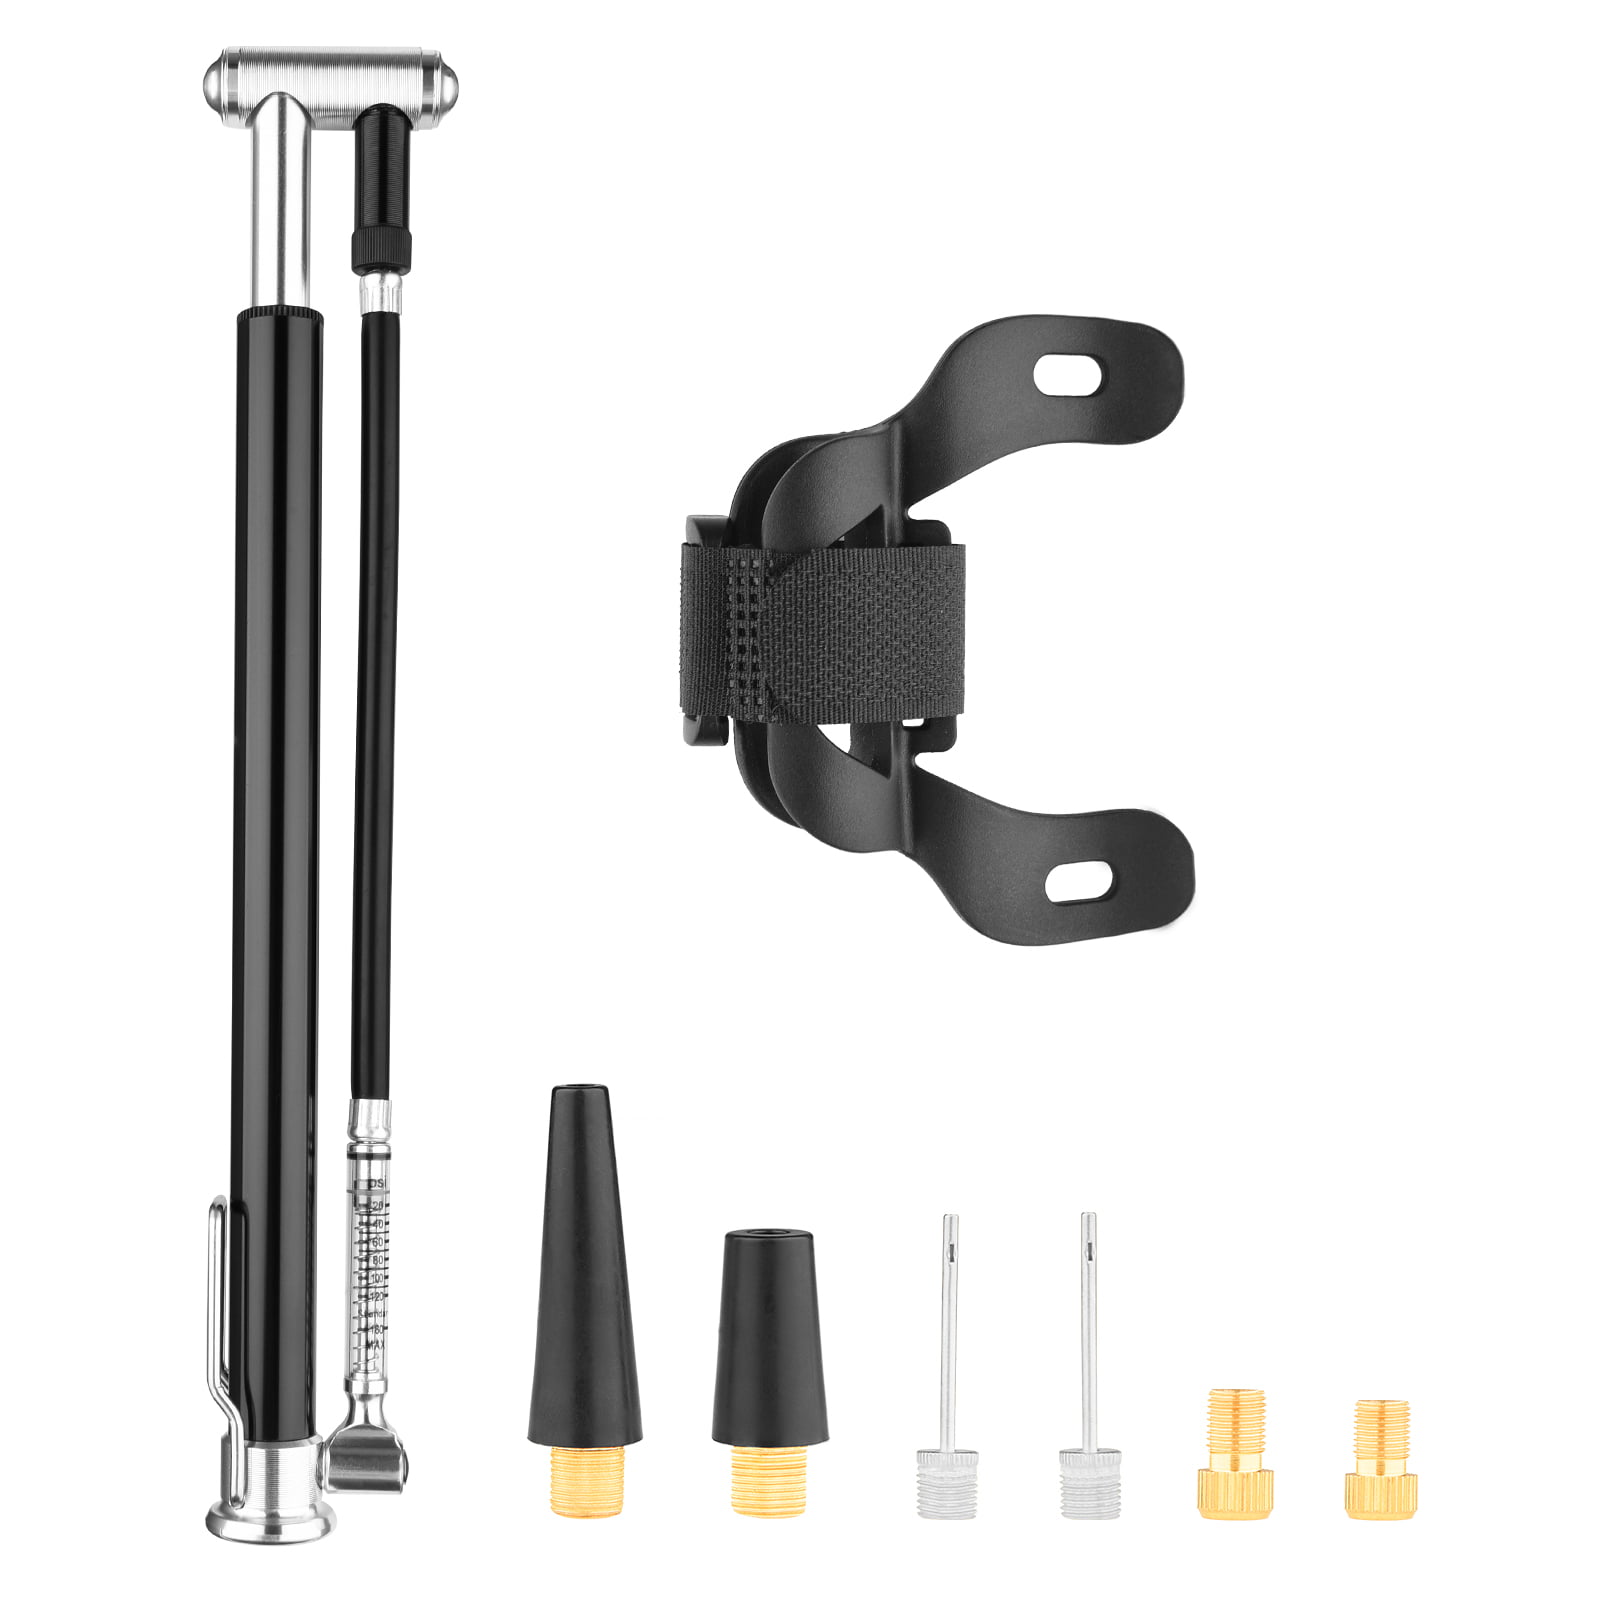 Balls UBULLOX Mini Bike Pump Mini Bike Floor Pump Portable Bicycle Tire Pump Hand Foot Activated Bike Pump with Presta and Schrader Valves for Bicycles Football Basketball and More